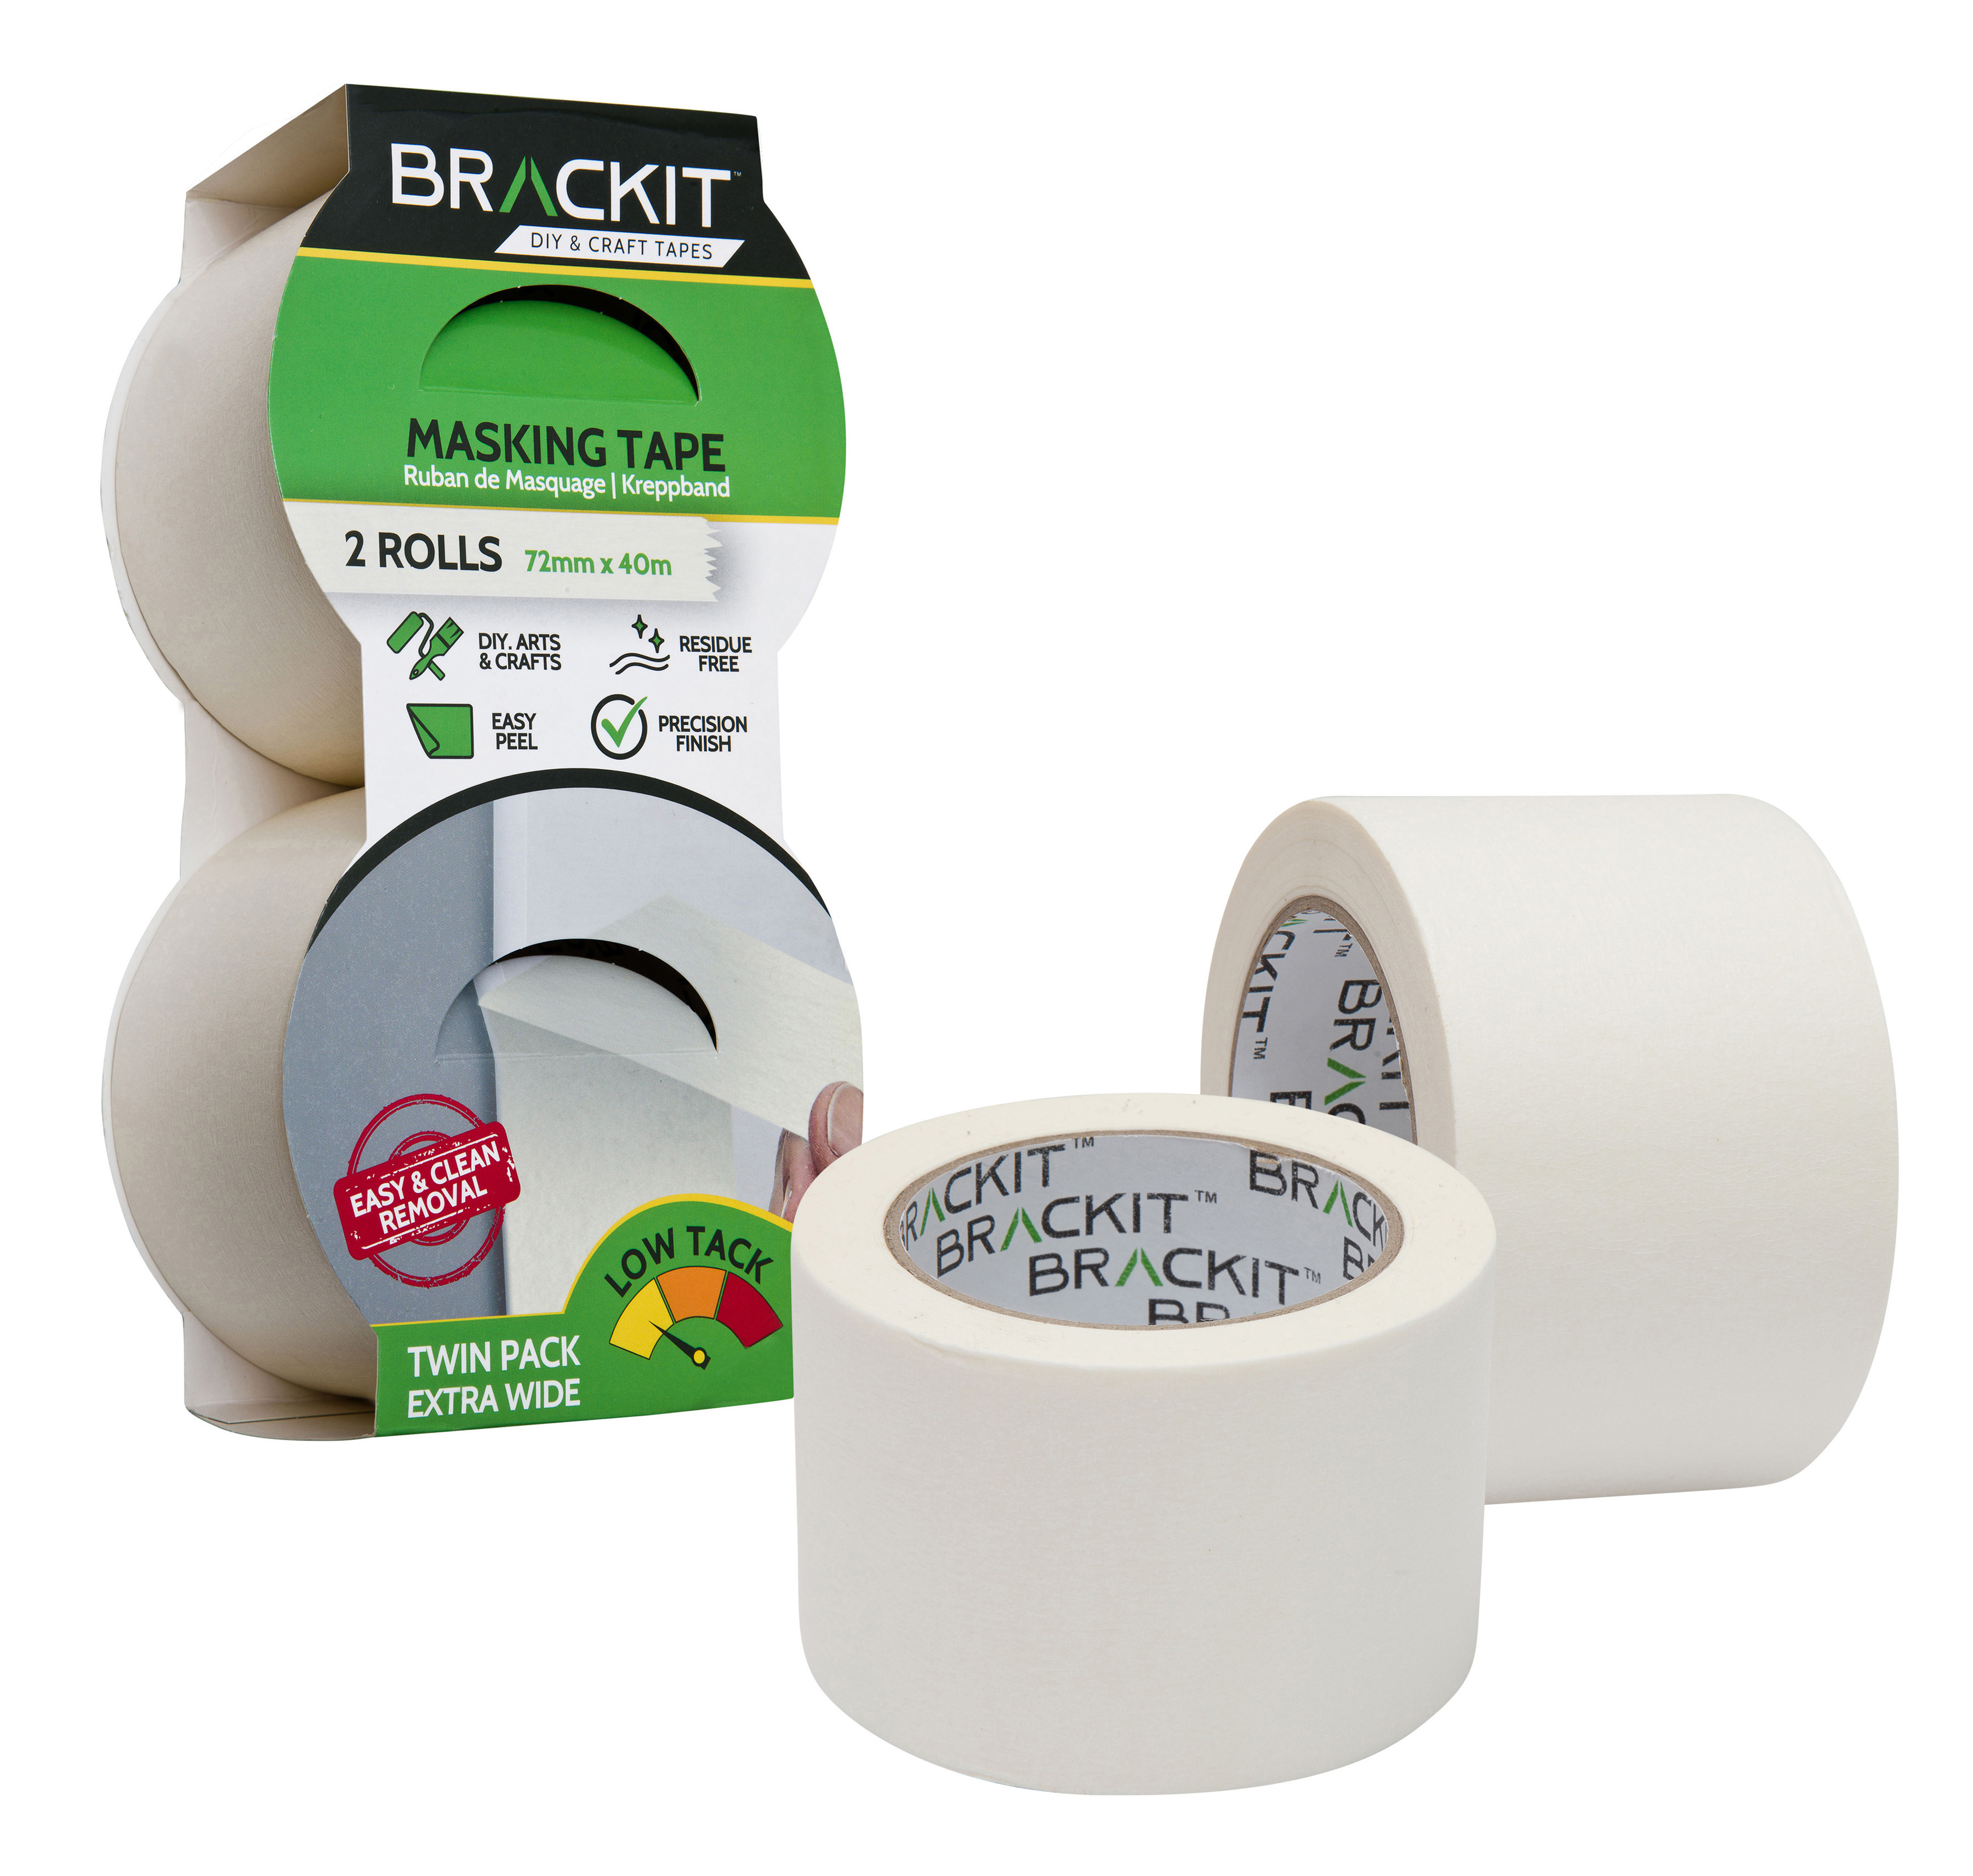 brackit White Masking Tape; Twin Pack - Easy Removal For Painting and Decorating or Arts and Crafts… (72mm)